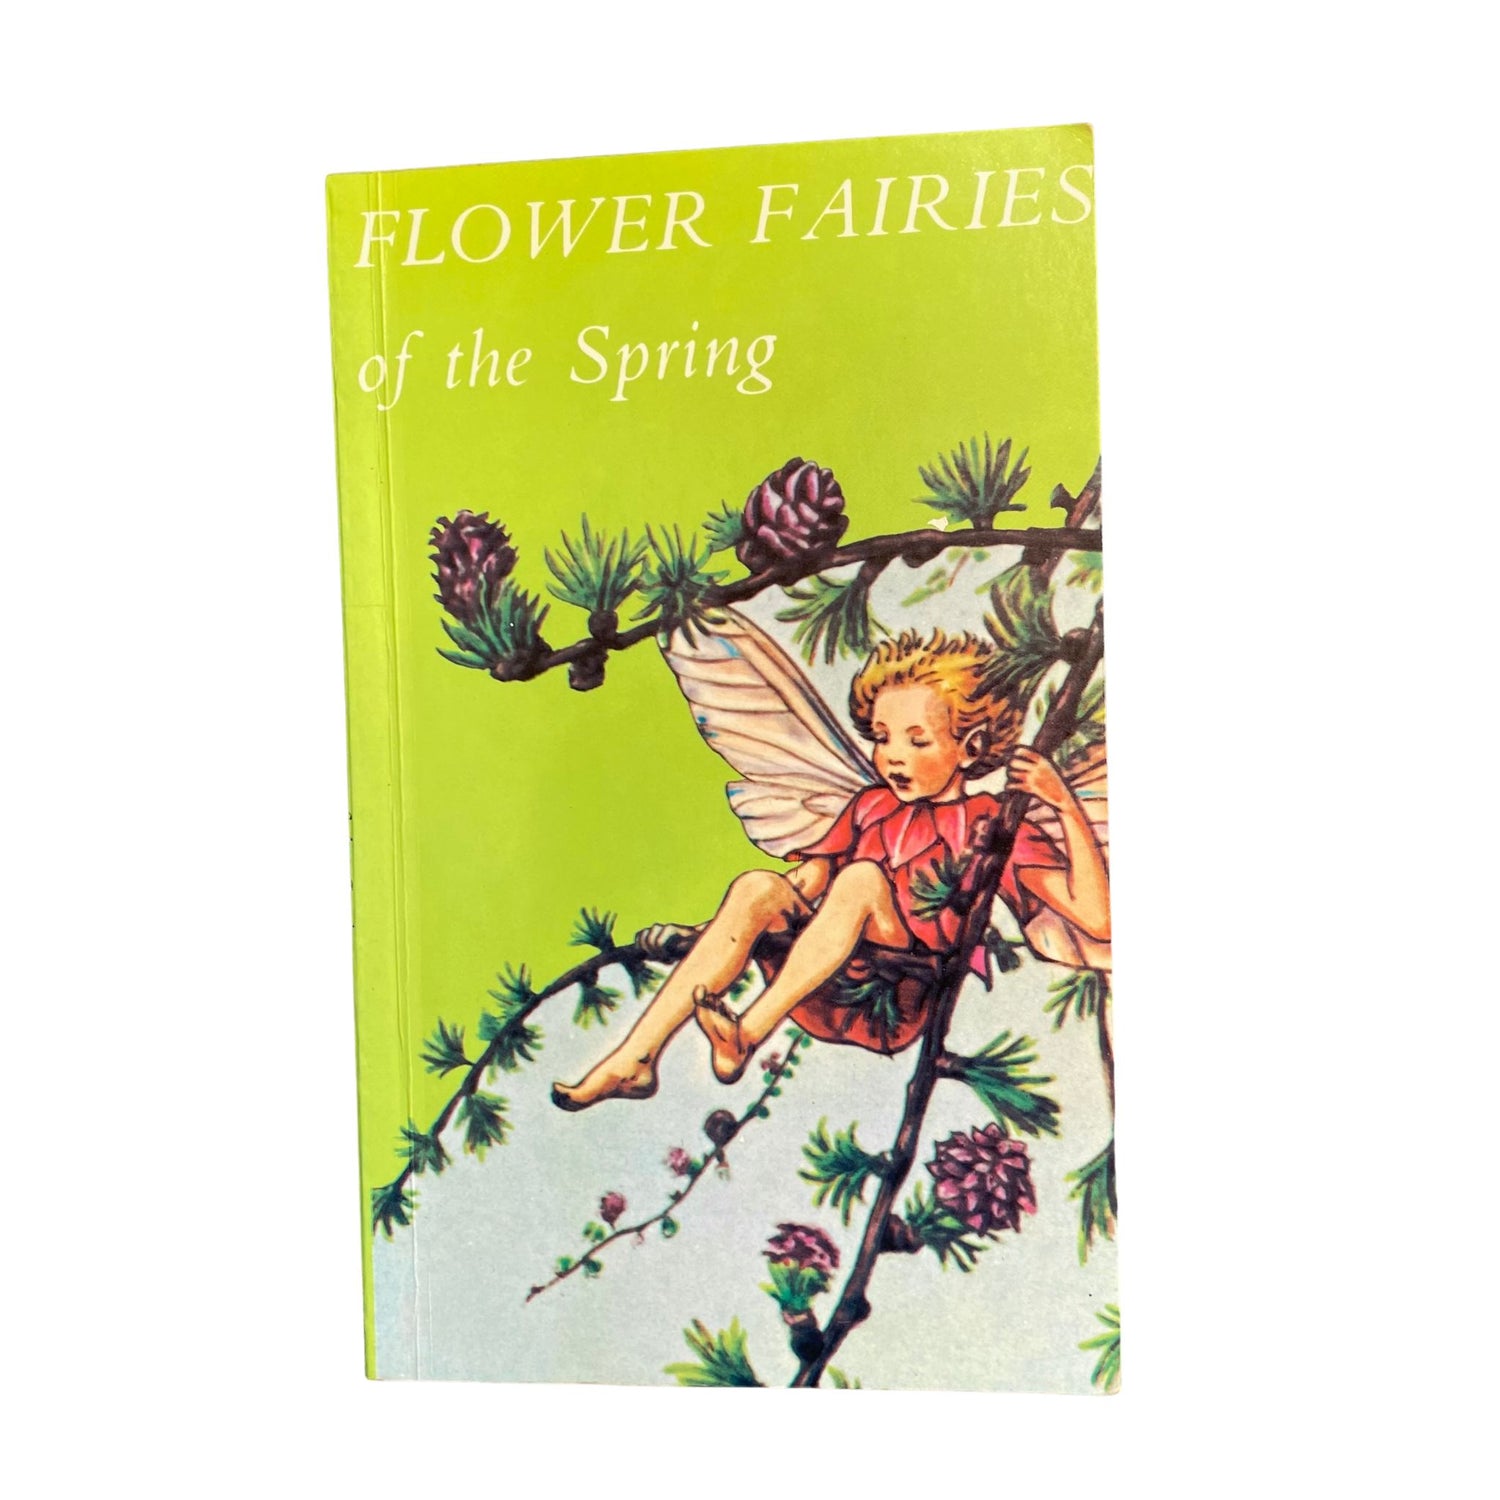 Vintage 1970s copy of small green book fearing a fairy on the cover - Flower Fairies of the Spring 